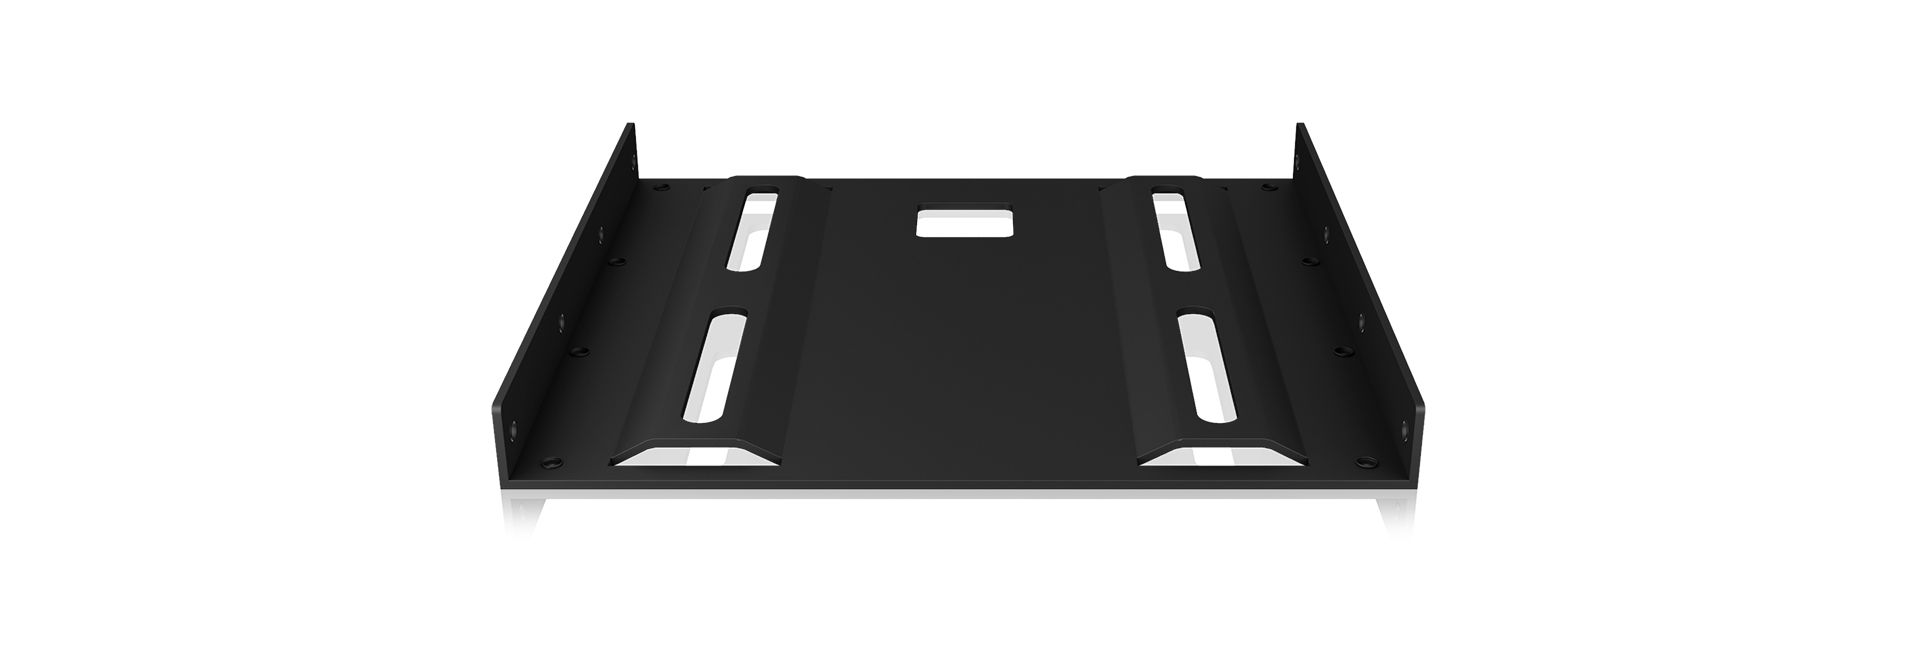 ICYBOX IB-AC653 IcyBox Internal Mounting frame 3,5 for 2.5 HDD/SSD, Black_8